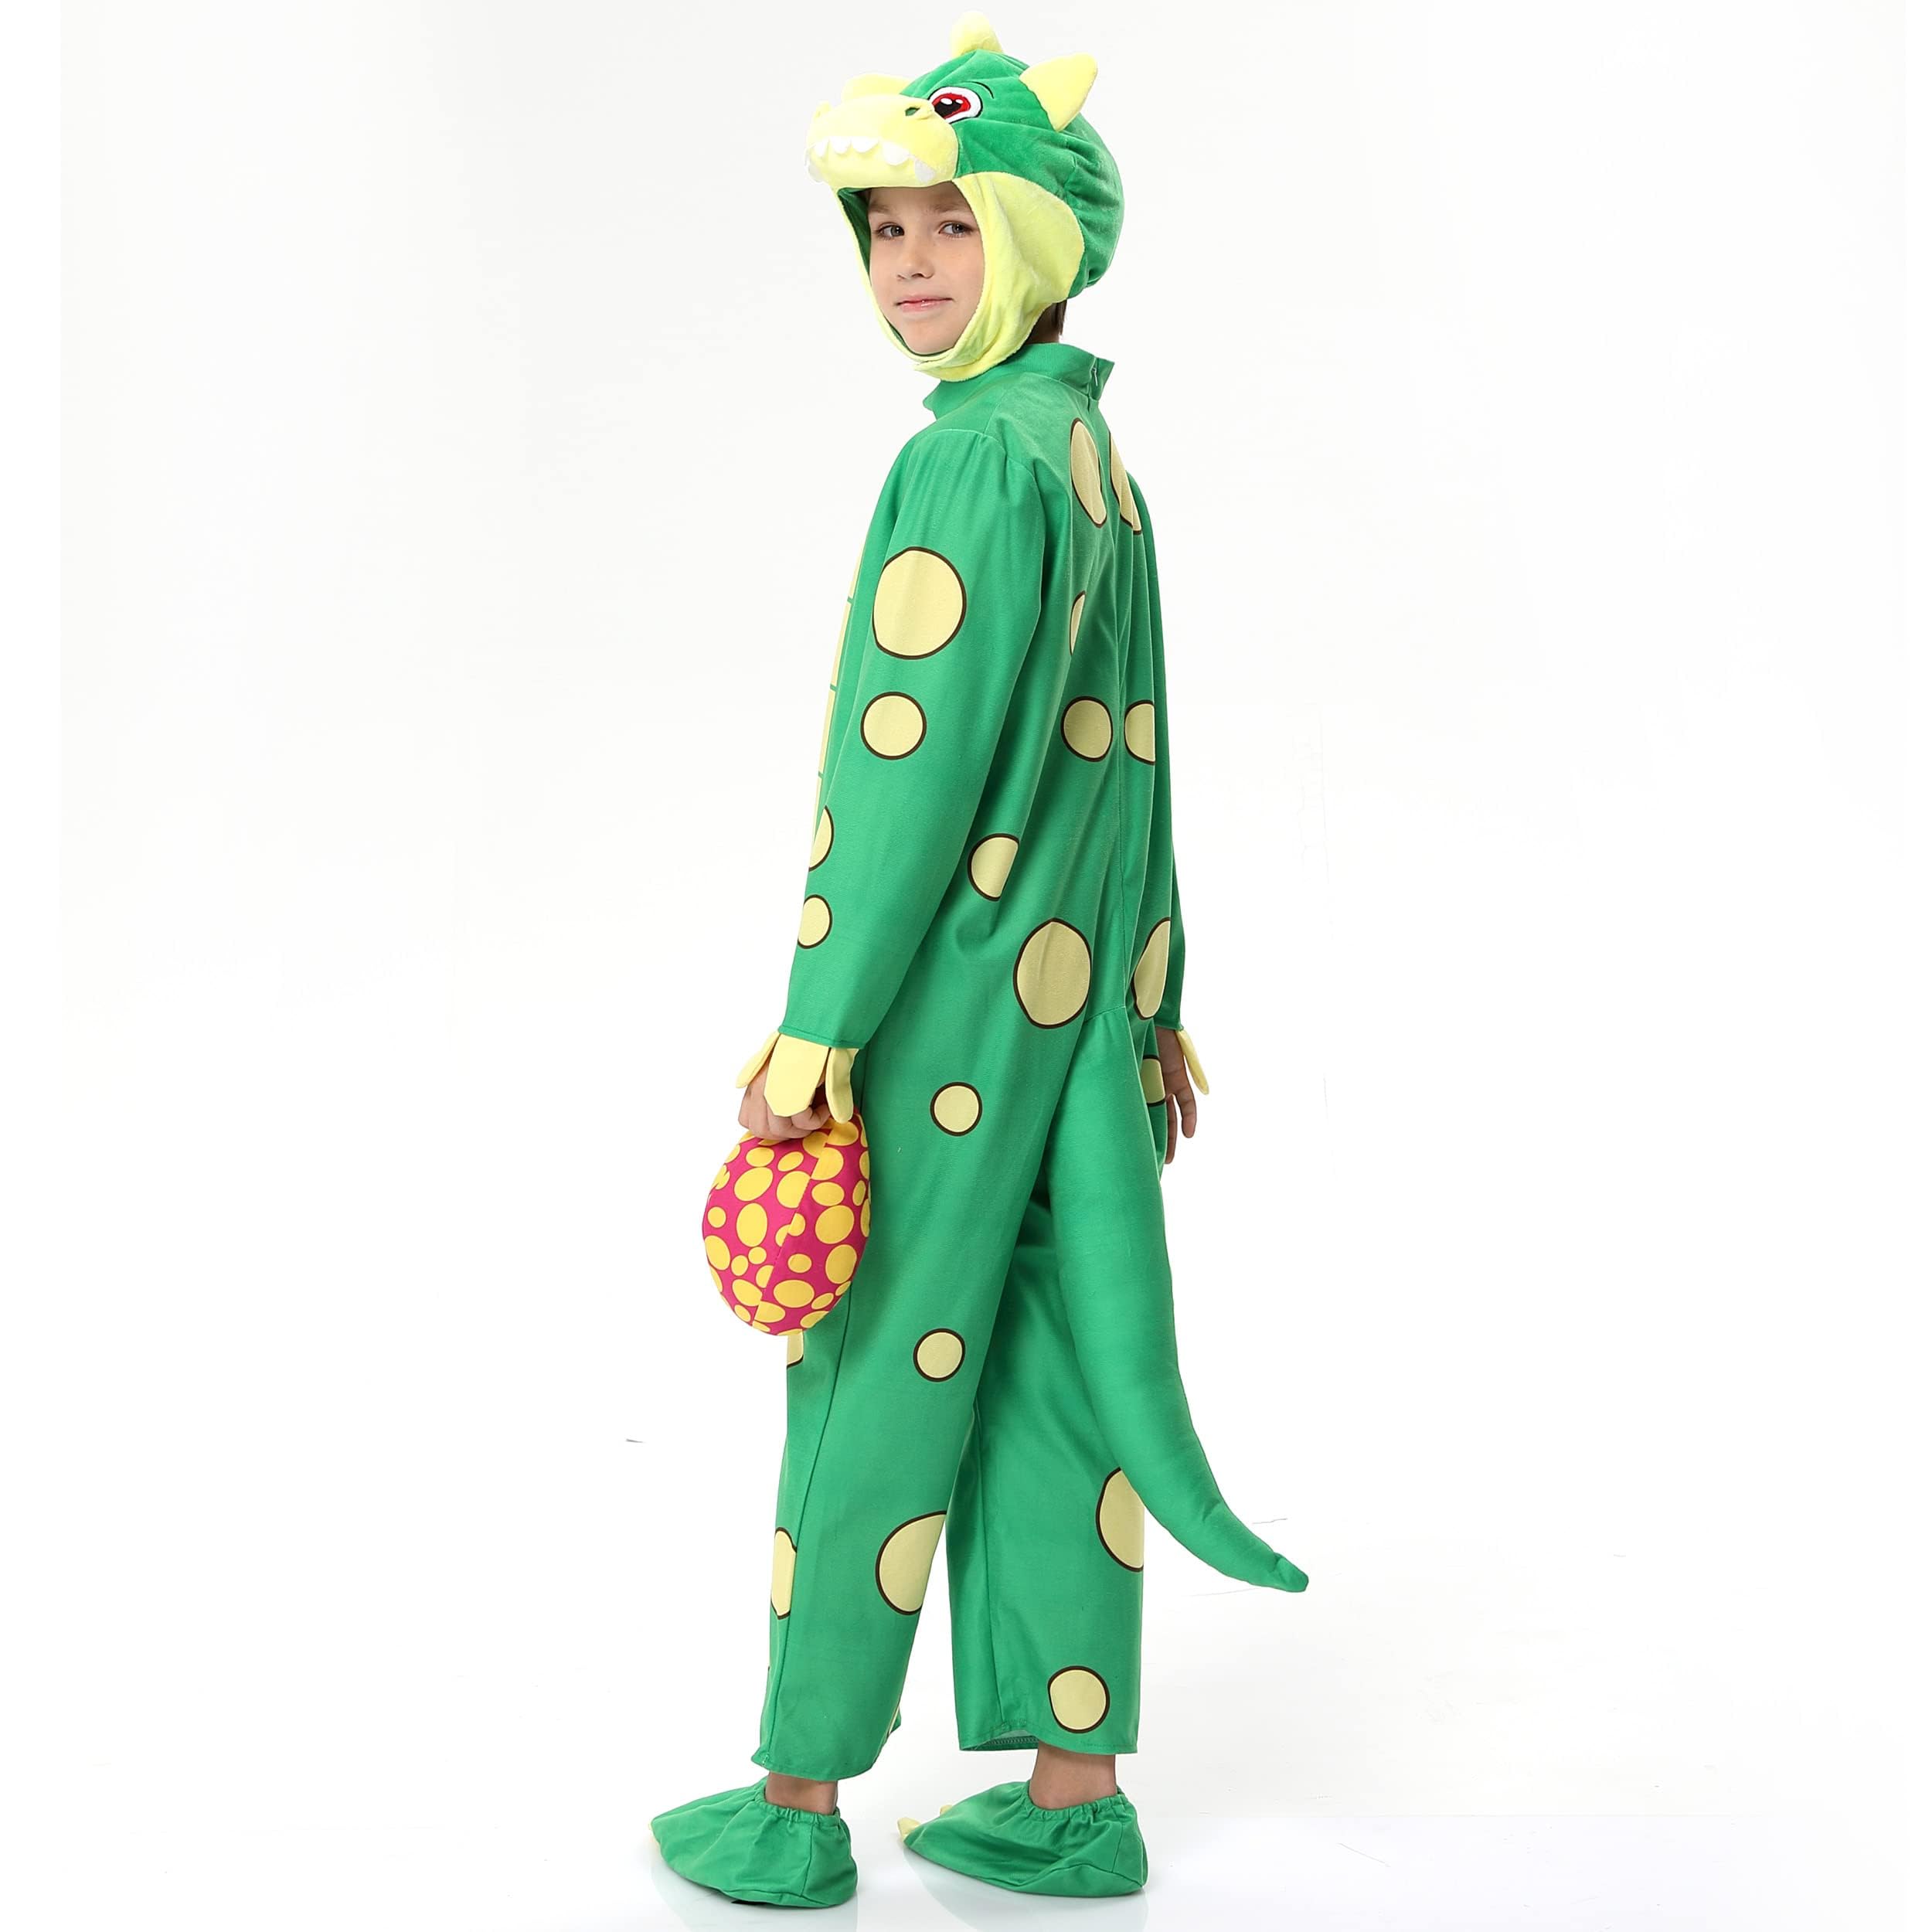 LIZHOUMIL Dinosaur Costume for Kids - Perfect for Dress-Up Party, Role Play, and Cosplay